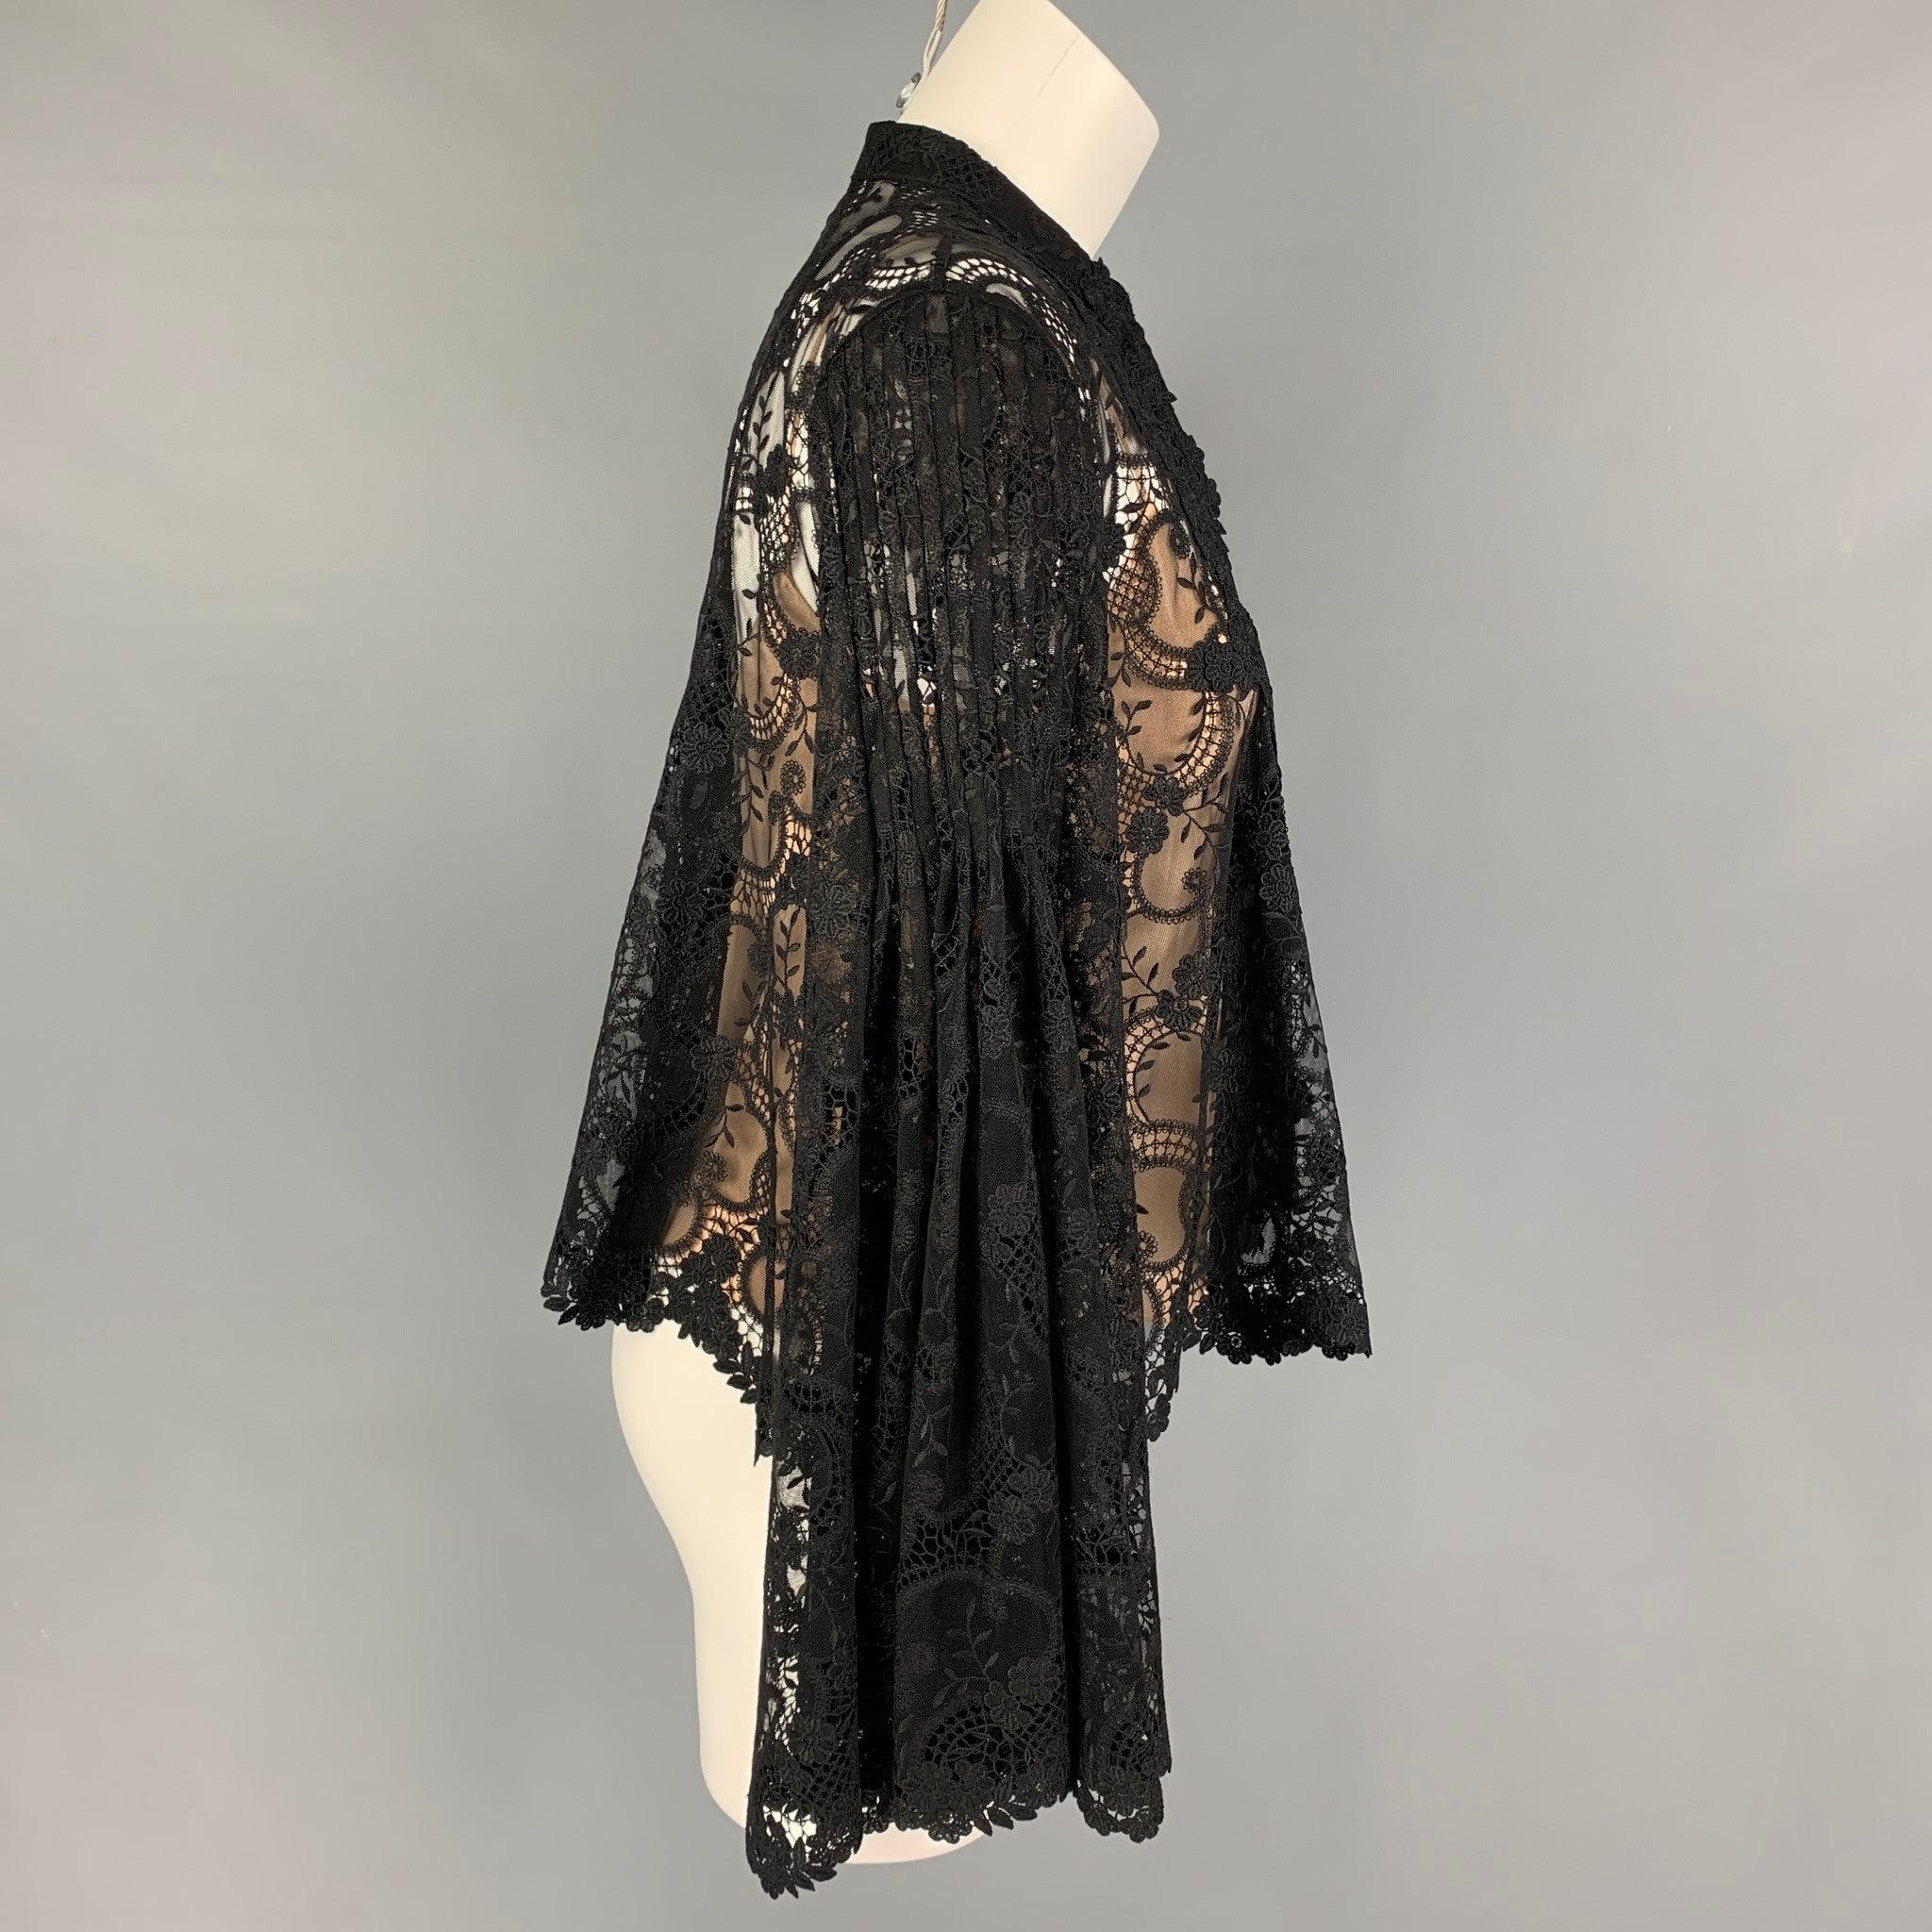 OSCAR DE LA RENTA blouse comes in a black lace silk with a beige silk tank top featuring bell sleeves, collarless, and a buttoned closure. Made in Italy.
Very Good
Pre-Owned Condition. 

Marked:   6 

Measurements: 
 
Shoulder: 15 inches  Bust: 40